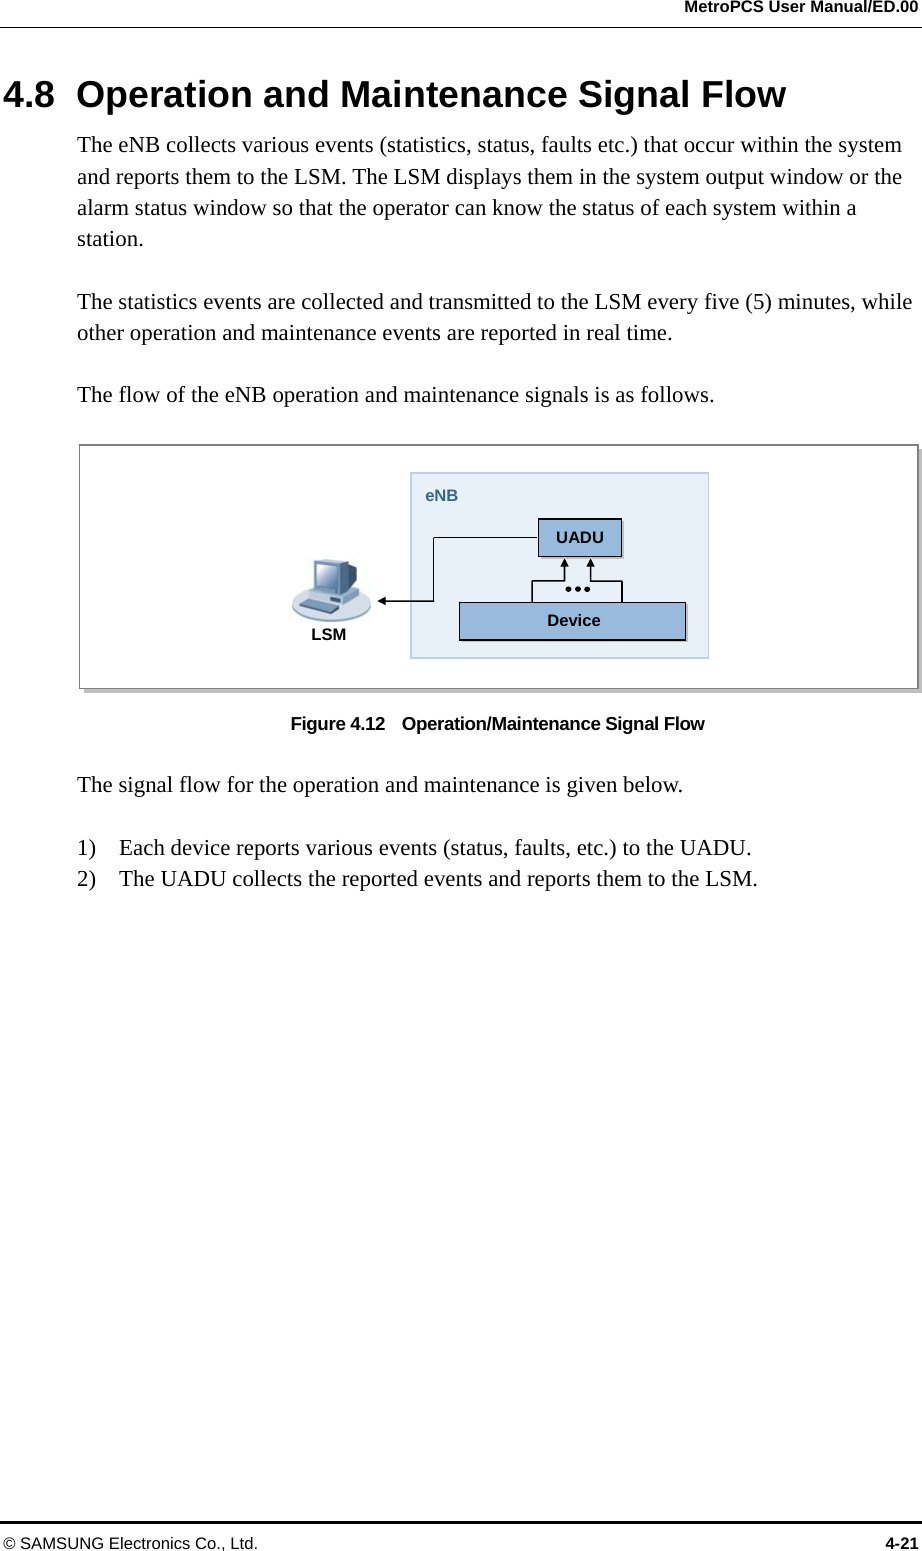  MetroPCS User Manual/ED.00 © SAMSUNG Electronics Co., Ltd.  4-21 4.8  Operation and Maintenance Signal Flow The eNB collects various events (statistics, status, faults etc.) that occur within the system and reports them to the LSM. The LSM displays them in the system output window or the alarm status window so that the operator can know the status of each system within a station.  The statistics events are collected and transmitted to the LSM every five (5) minutes, while other operation and maintenance events are reported in real time.  The flow of the eNB operation and maintenance signals is as follows.  Figure 4.12    Operation/Maintenance Signal Flow  The signal flow for the operation and maintenance is given below.  1)    Each device reports various events (status, faults, etc.) to the UADU. 2)    The UADU collects the reported events and reports them to the LSM.  eNBLSM UADUDevice 